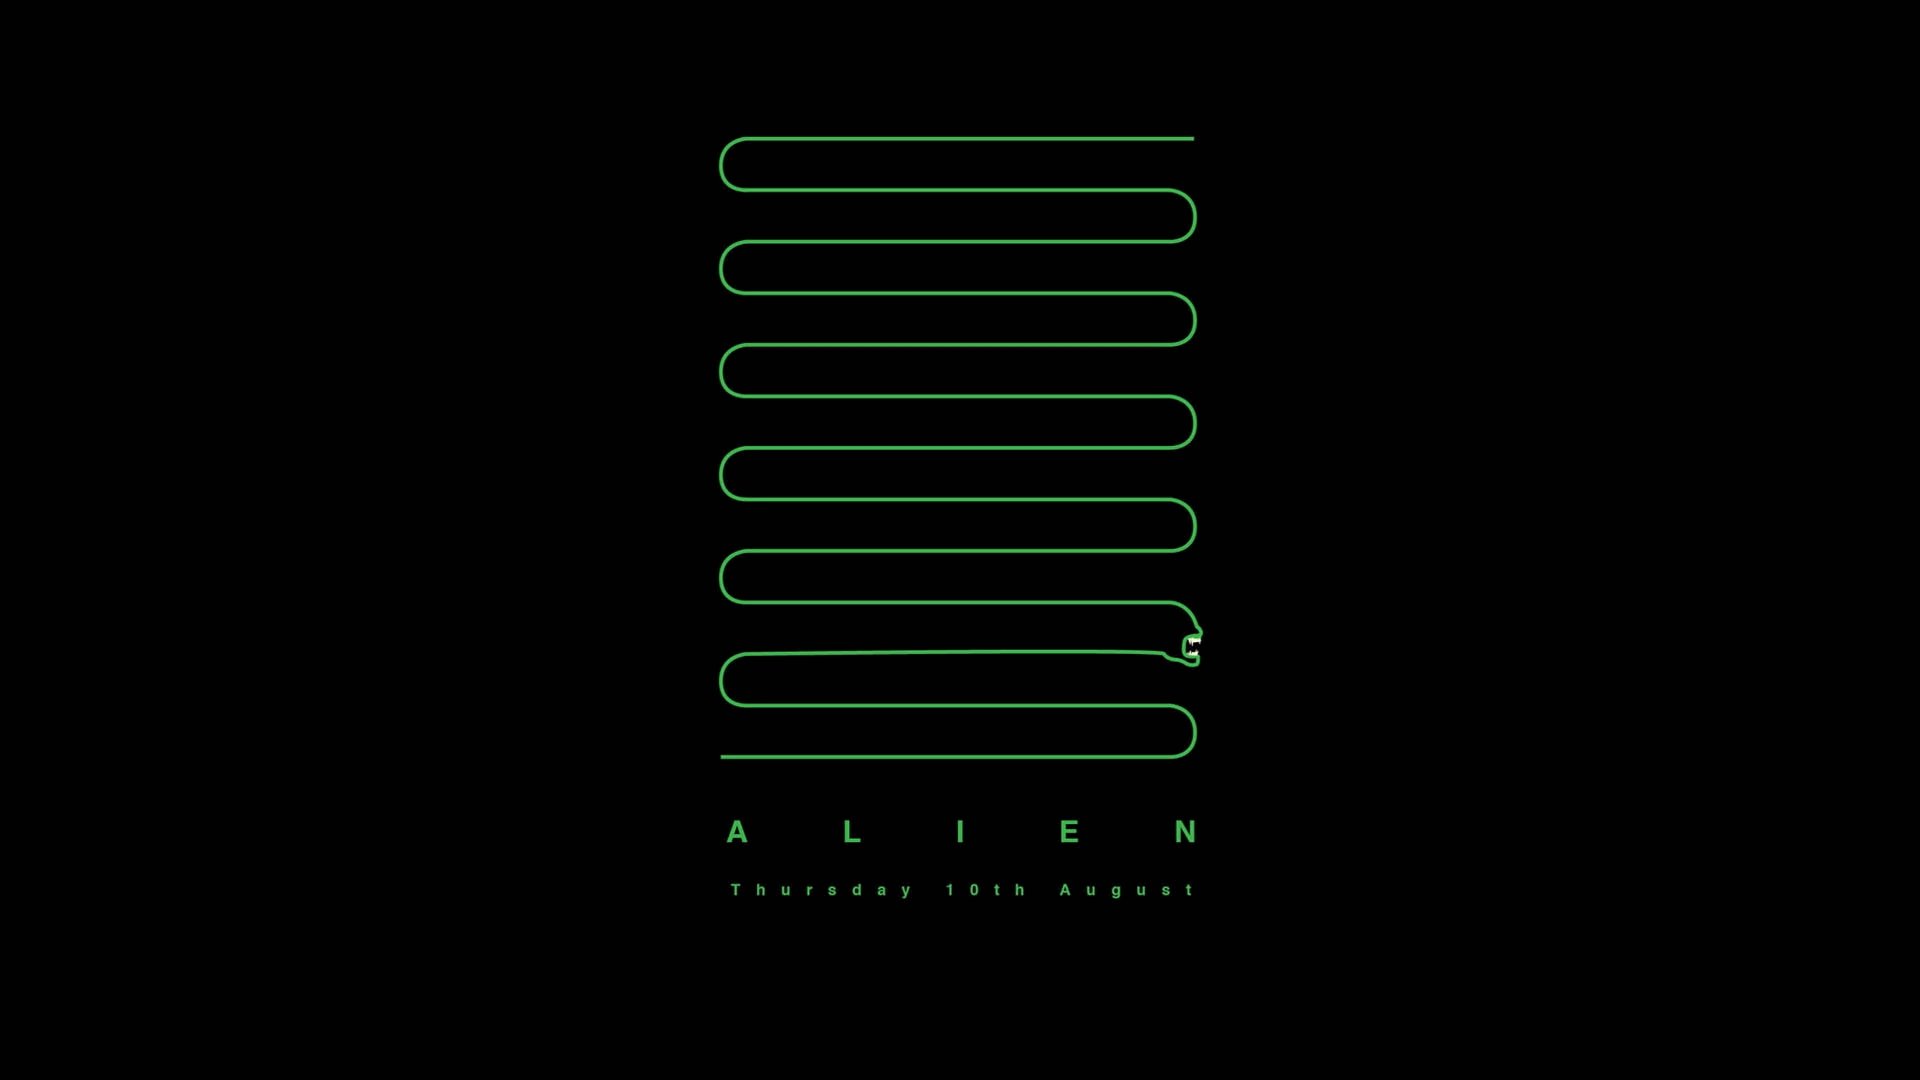 Download 1080p Alien Movie PC wallpaper ID:25343 for free